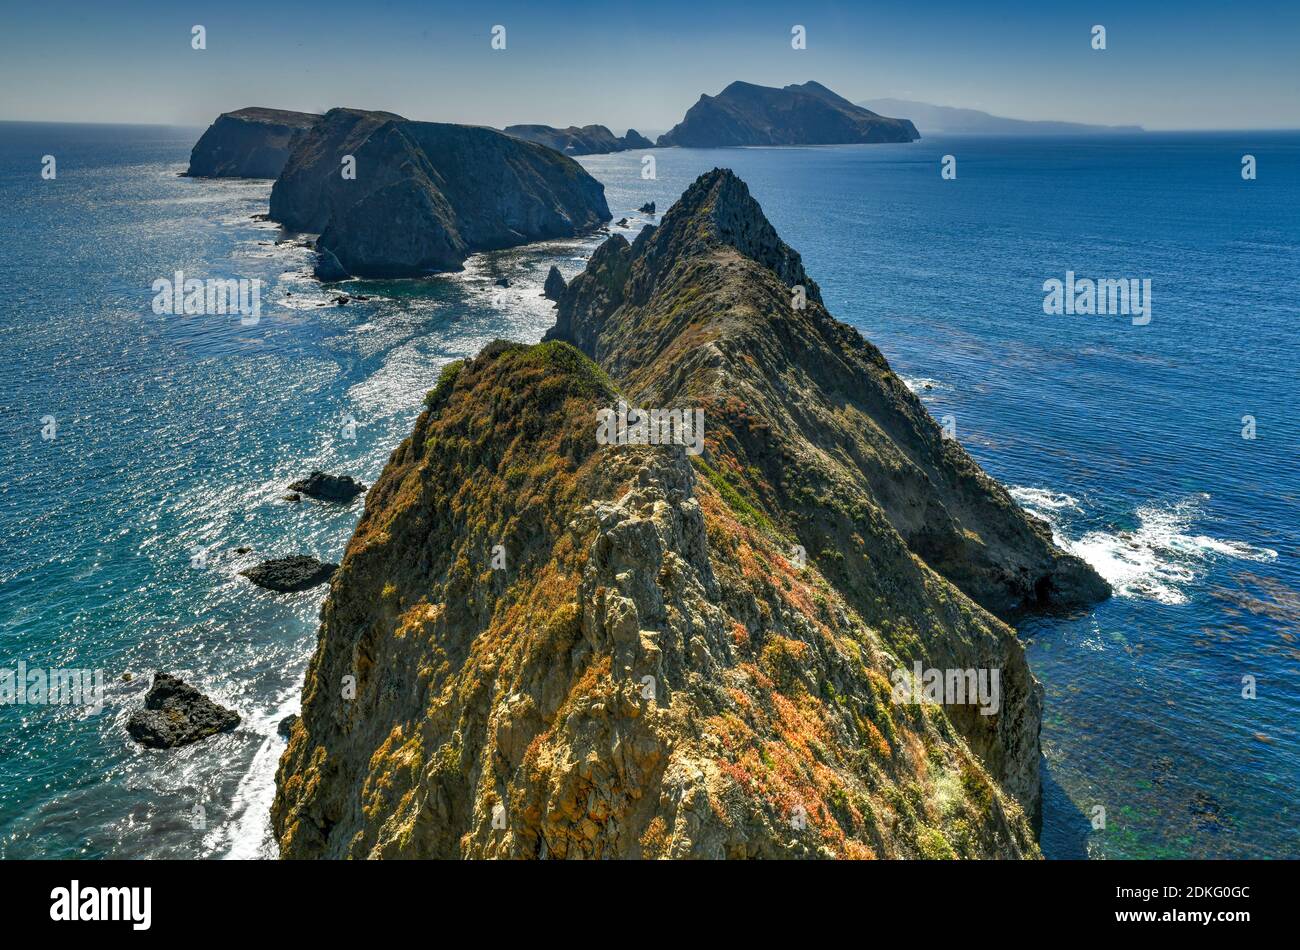 View from Inspiration Point, Anacapa island, California in Channel Islands National Park. Stock Photo